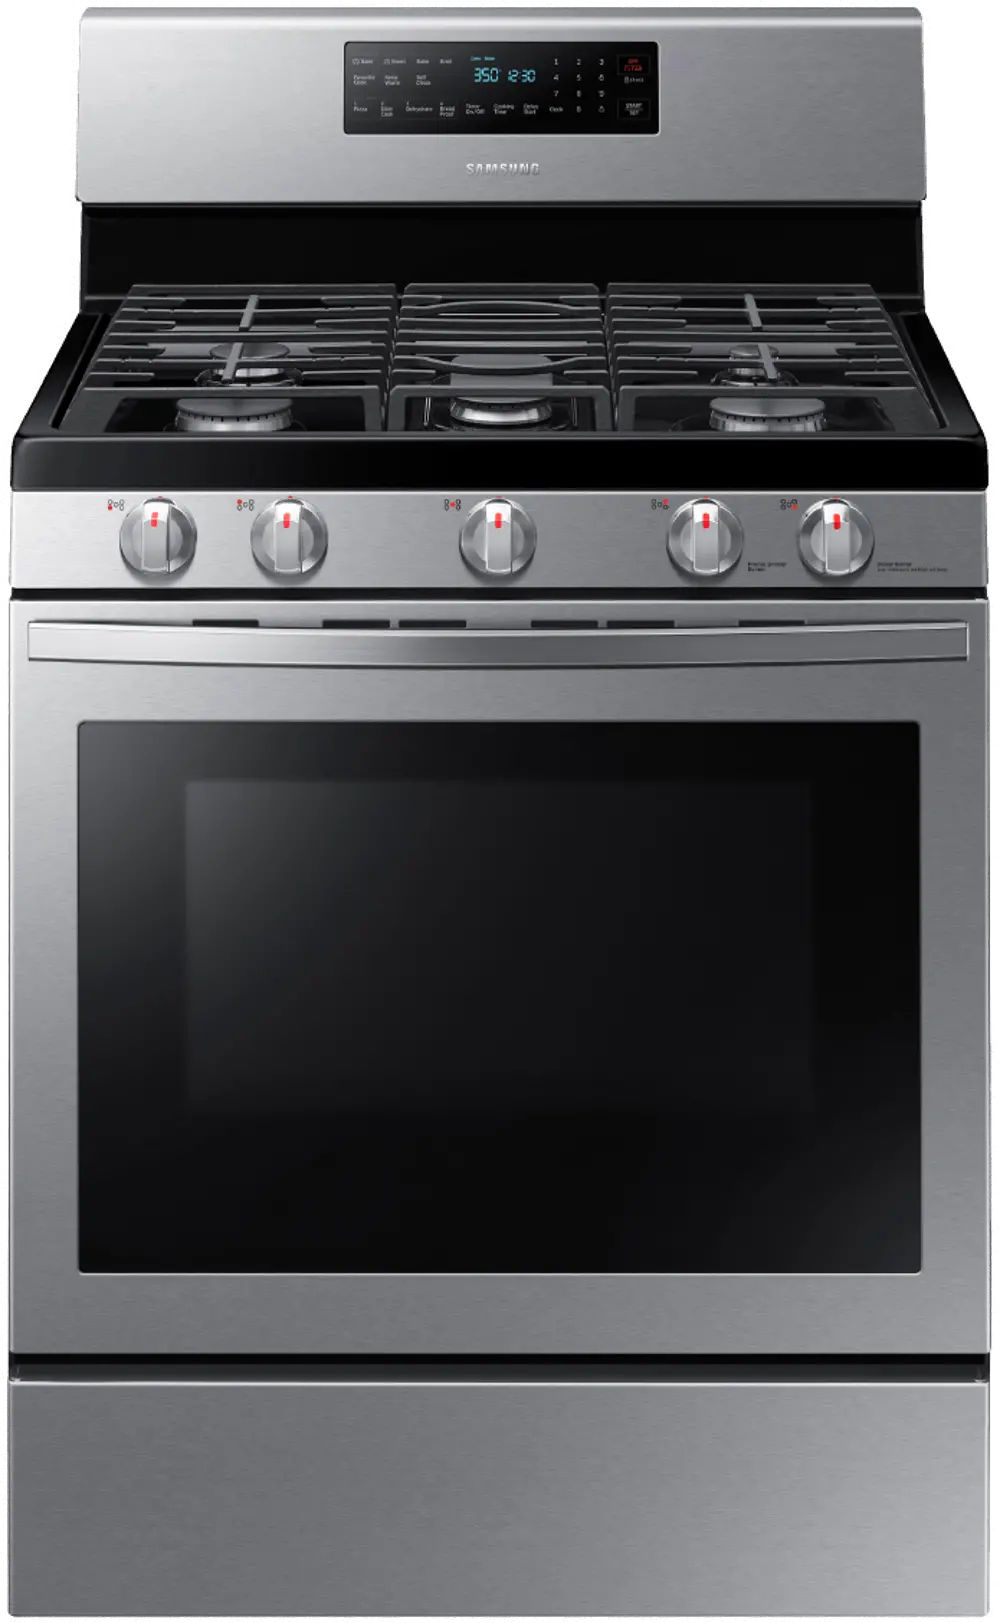 NX58R5601SS Samsung Gas Convection Range - Stainless Steel-1